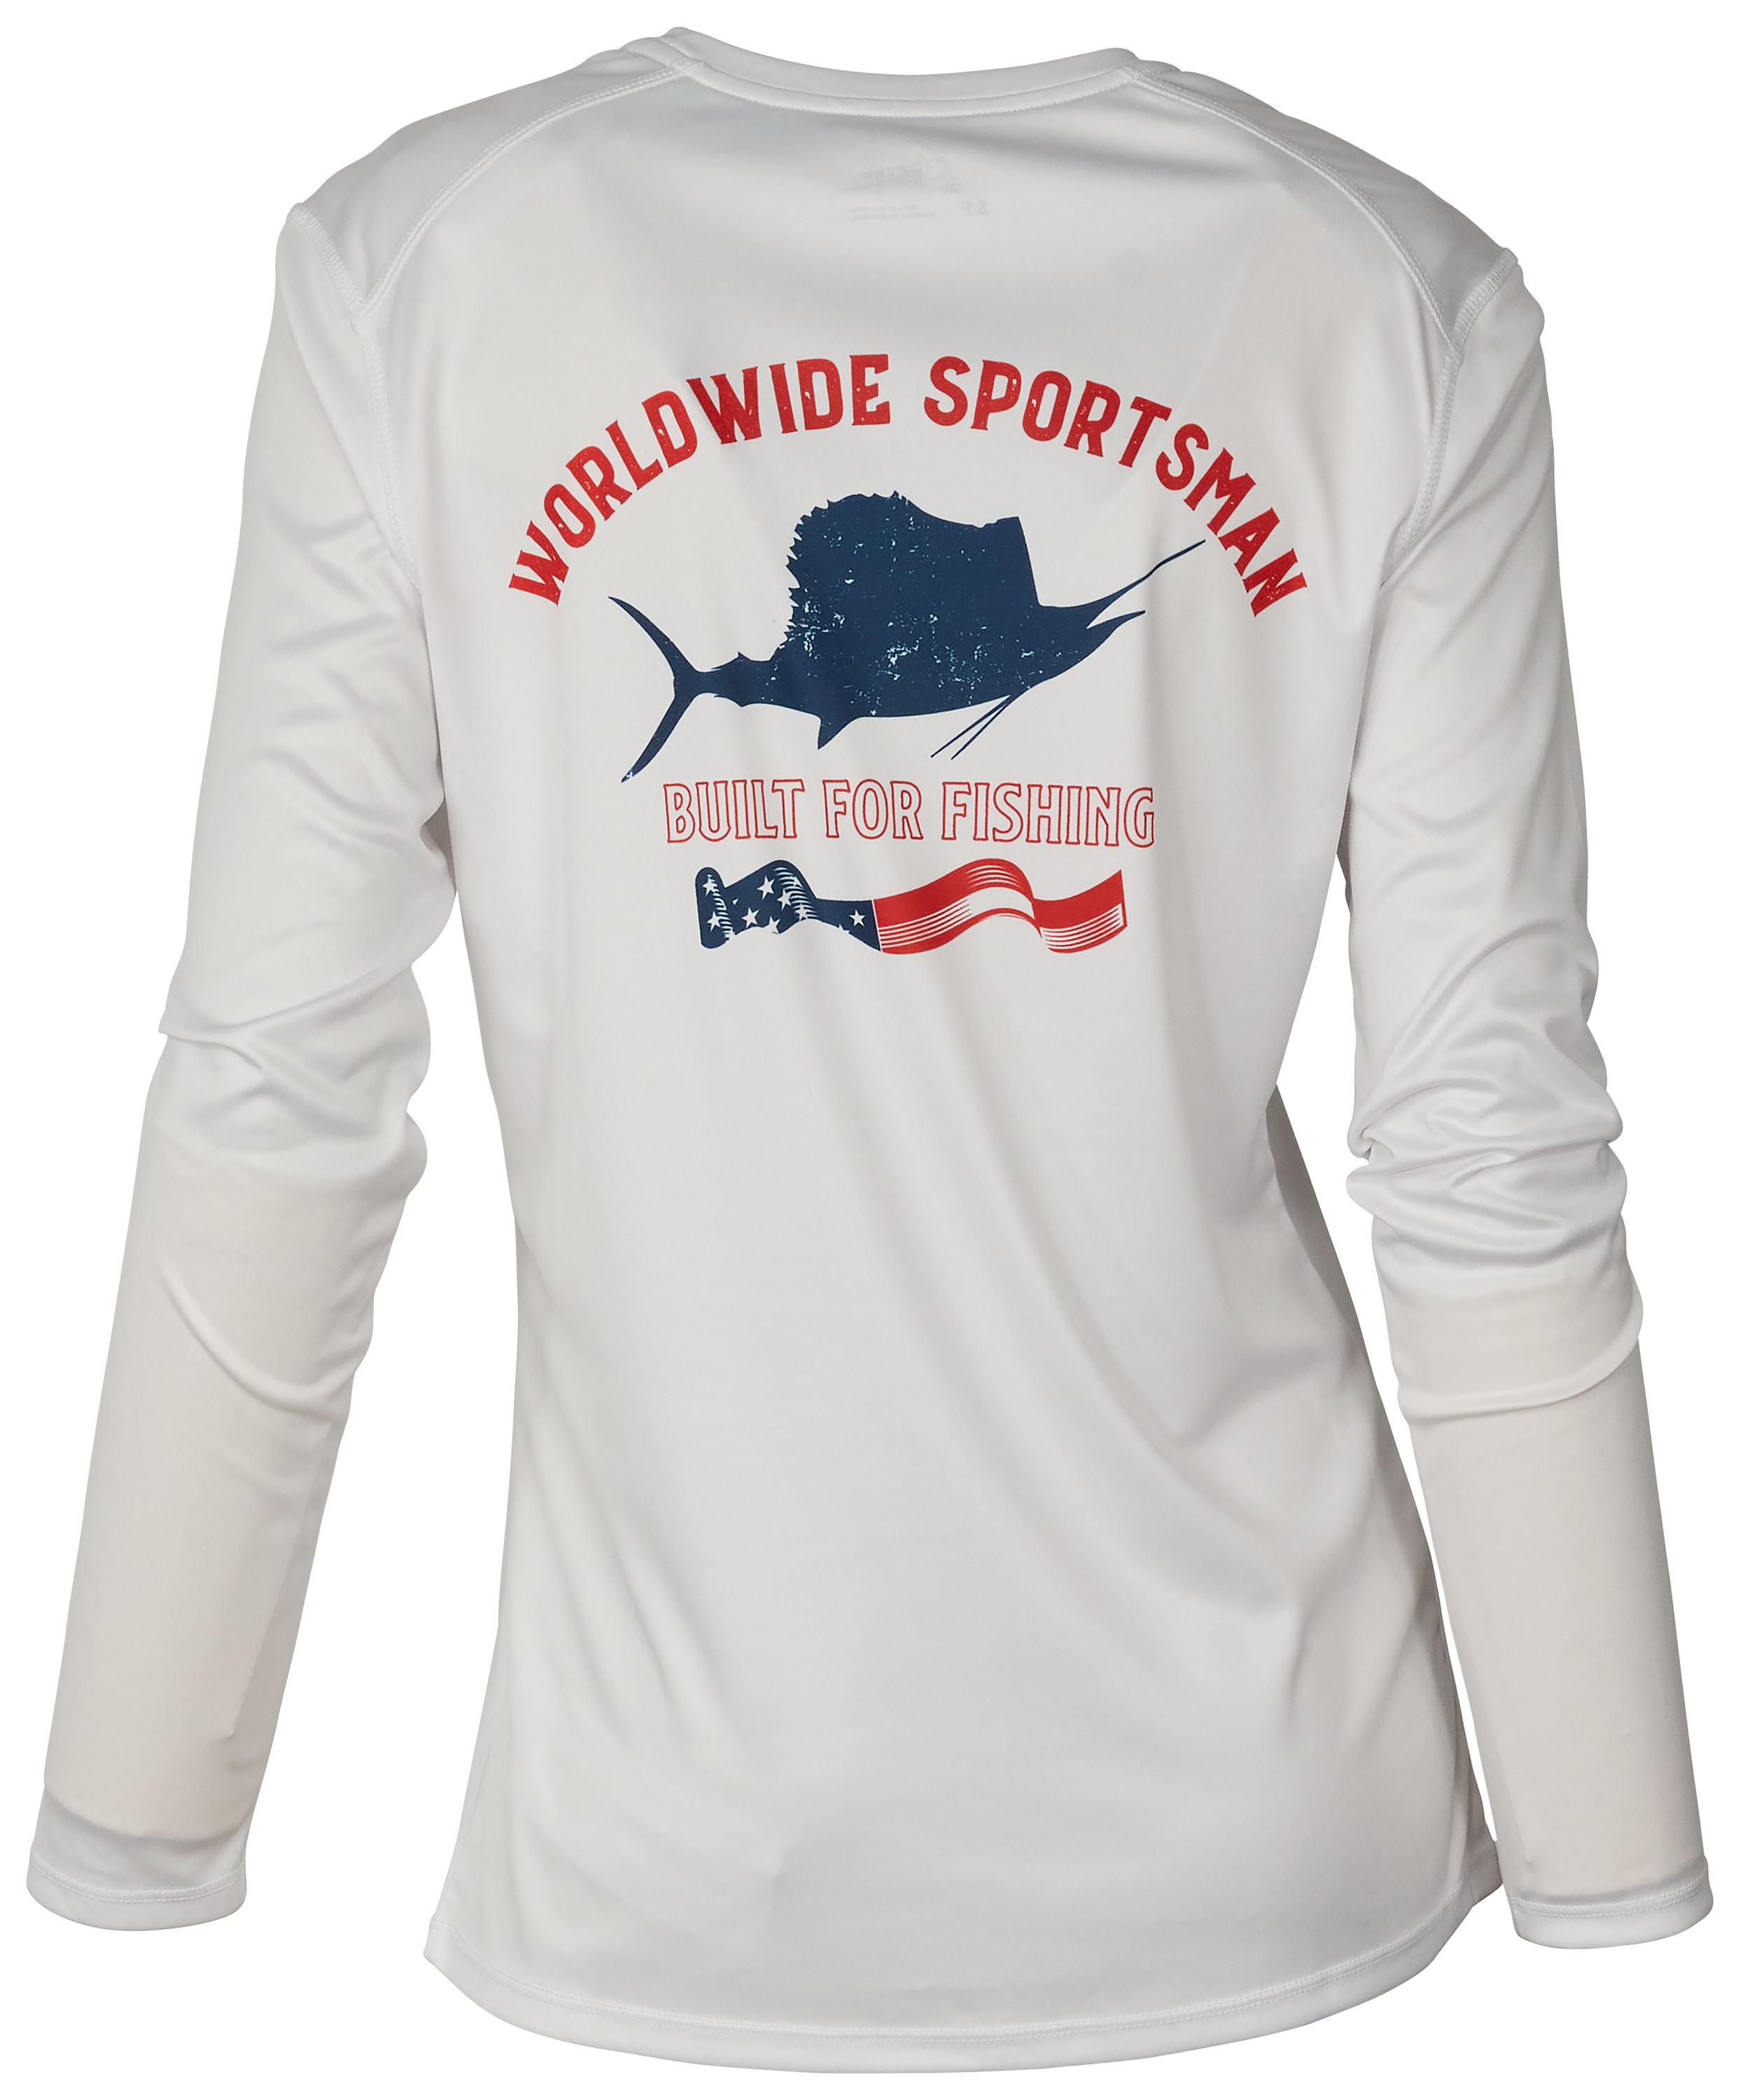 World Wide Sportsman Angler American Marlin Graphic Long-Sleeve Shirt for Ladies - XS